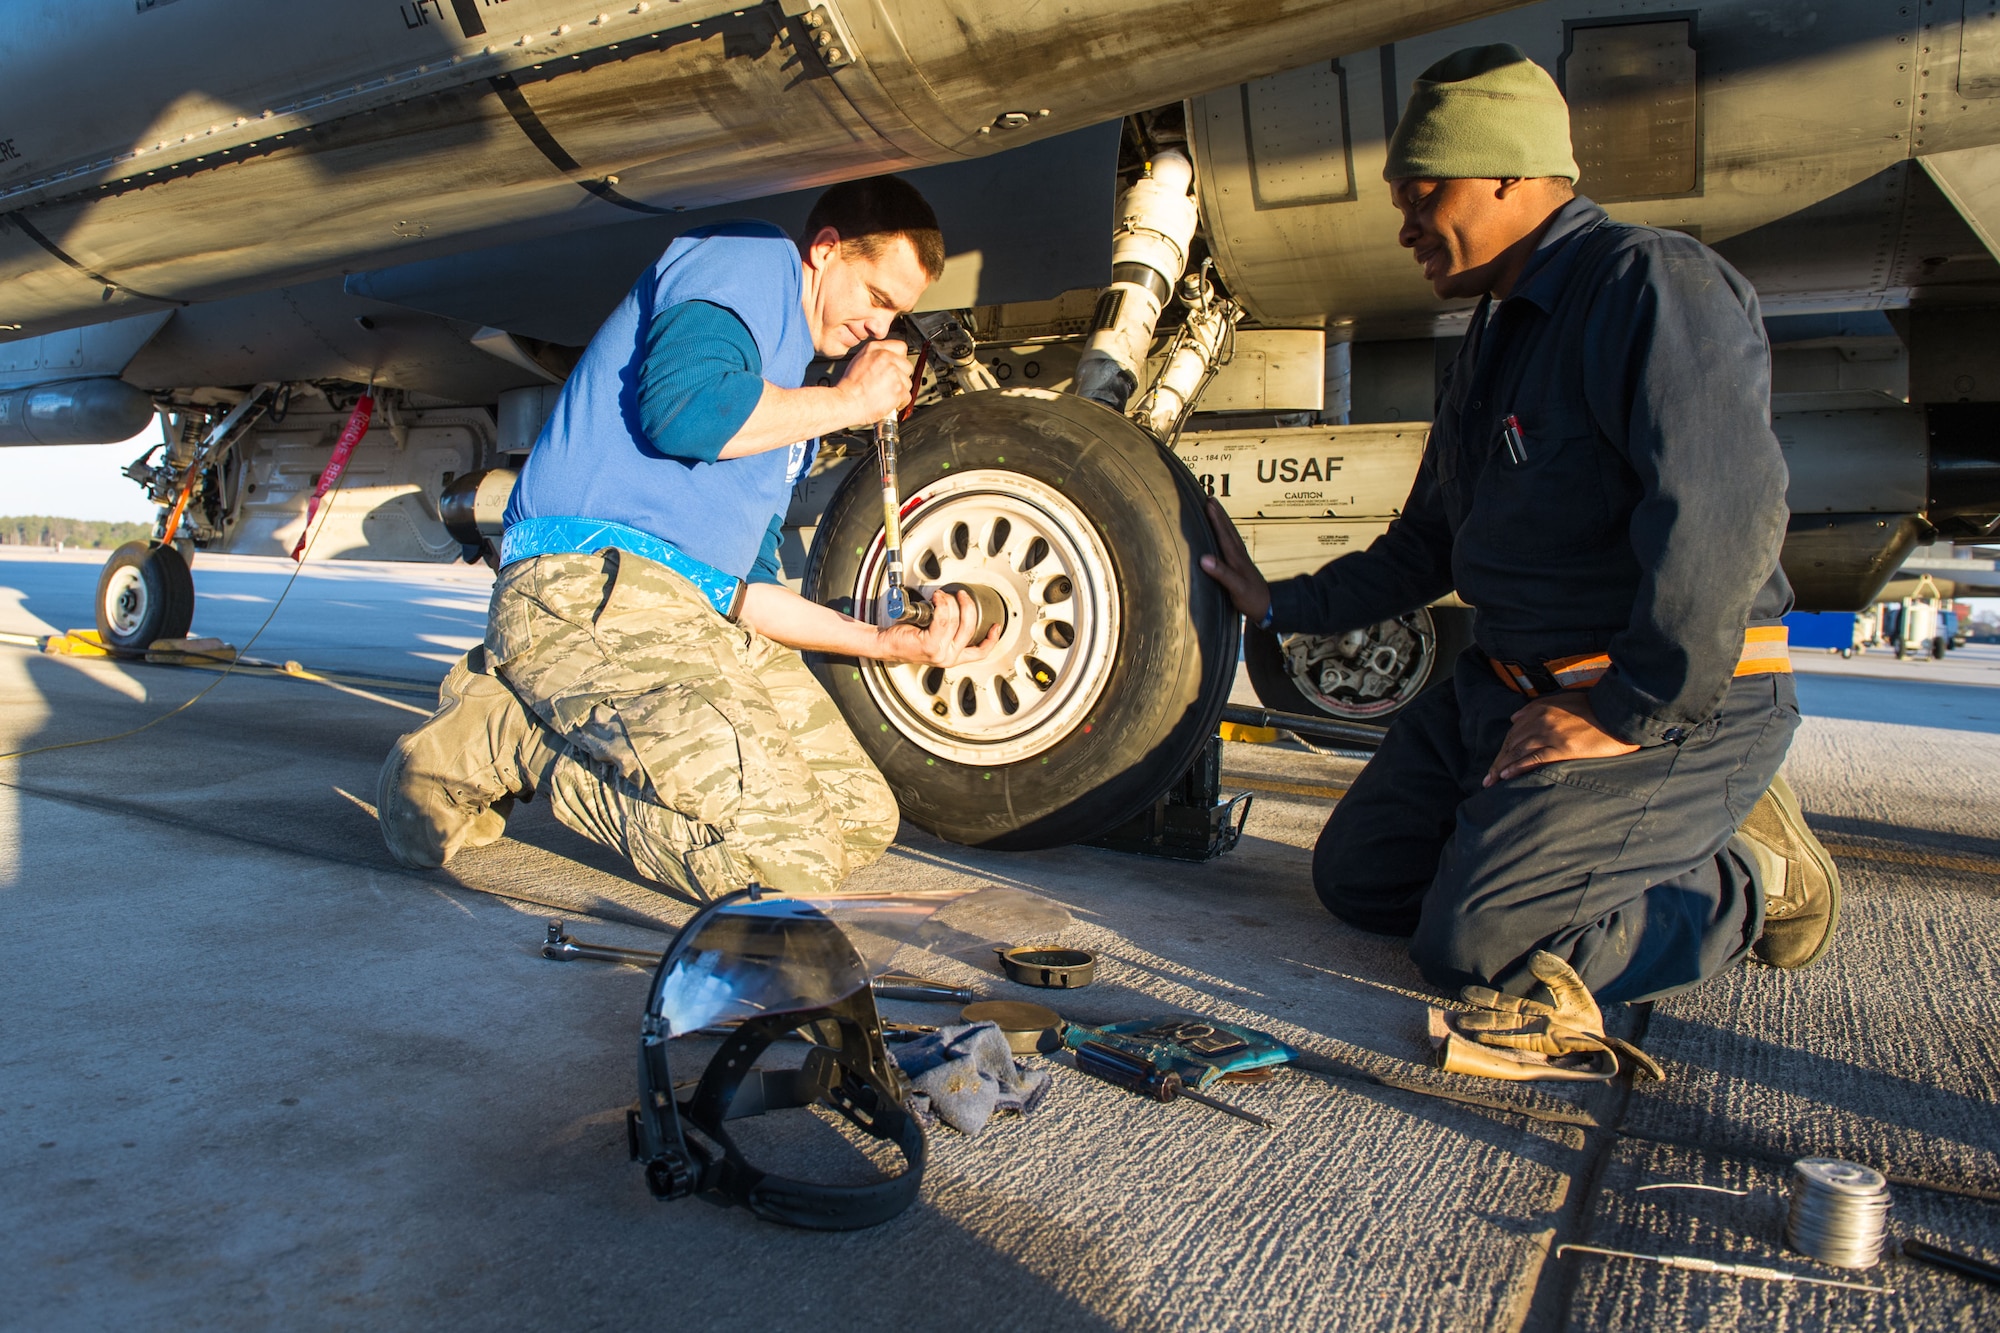 U.S. Air Force Tech. Sgt. Leonard Gajewski and Airman 1st Class Erskine Ham, crew chiefs assigned to the 169th Aircraft Maintenance Squadron, replace a damaged F-16 tire with a new one, Feb. 7, 2015, at McEntire Joint National Guard Base, S.C. Both Airmen are supporting surge flying operations, which encompasses high tempo flying as part of vital training in preparation for deployments. (U.S. Air National Guard photo by Tech. Sgt. Jorge Intriago/Released)